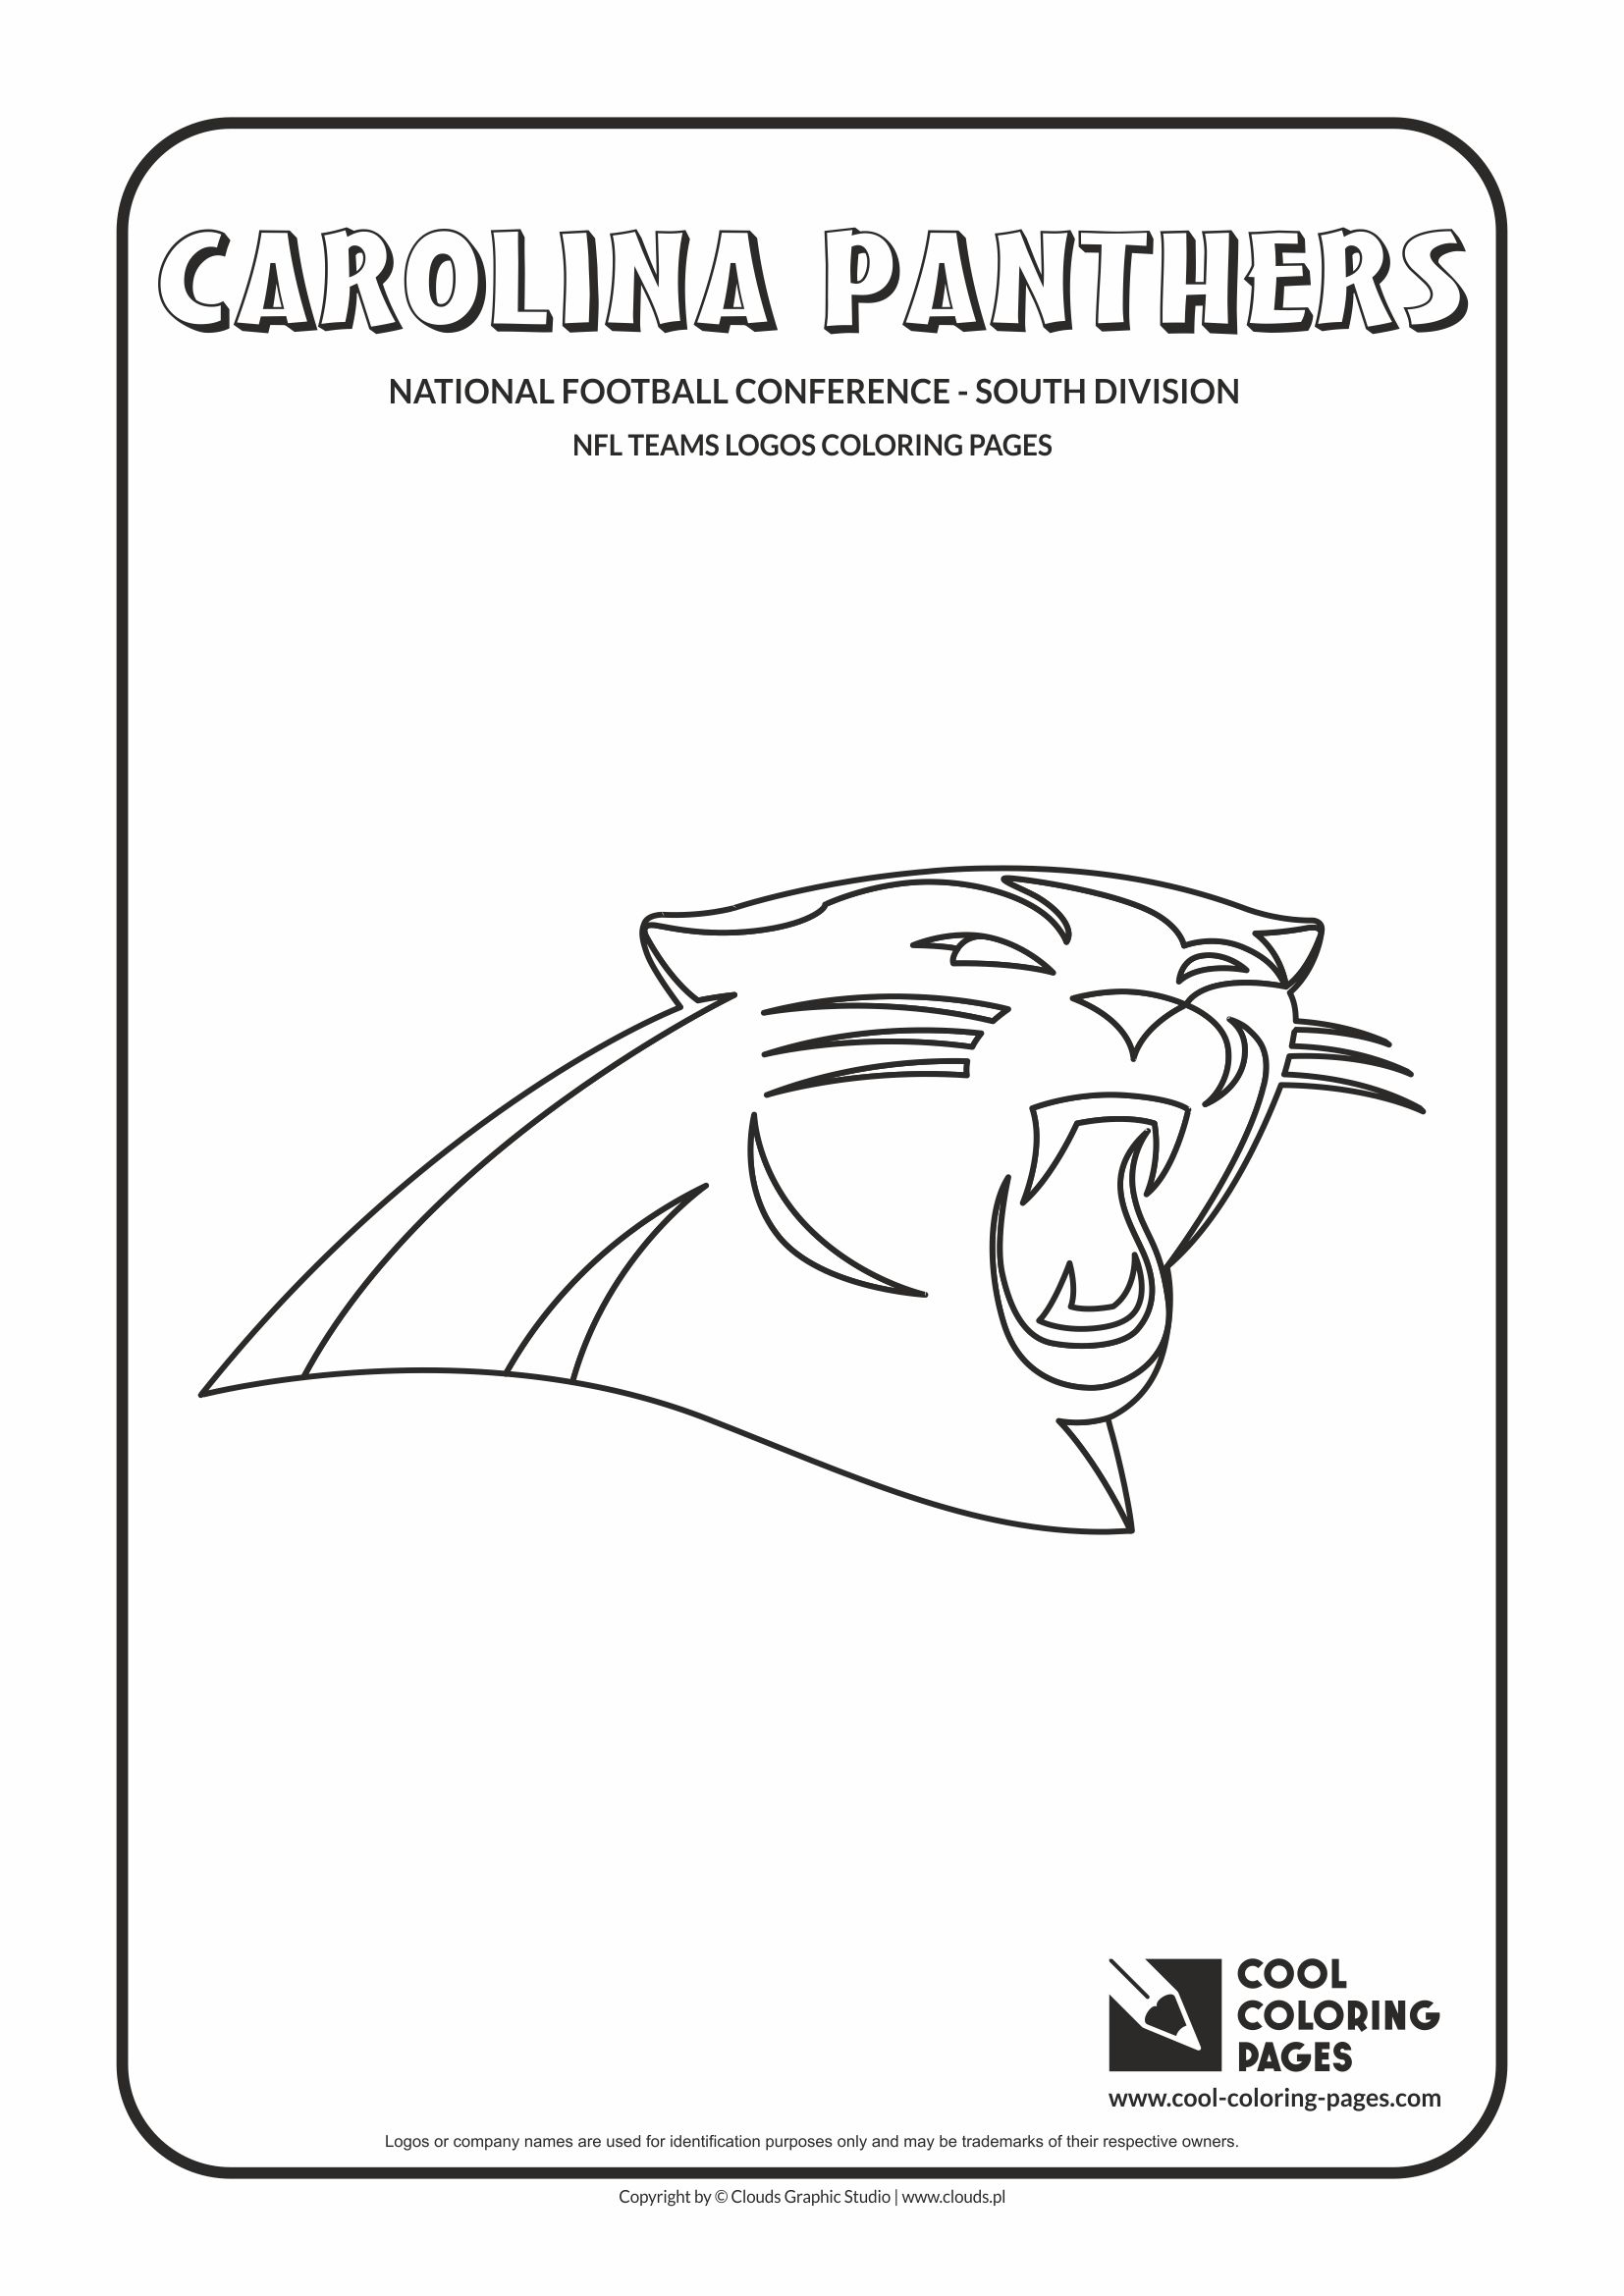 Cool Coloring Pages - NFL American Football Clubs Logos - National Football Conference - East Division / Carolina Panthers logo / Coloring page with Carolina Panthers logo